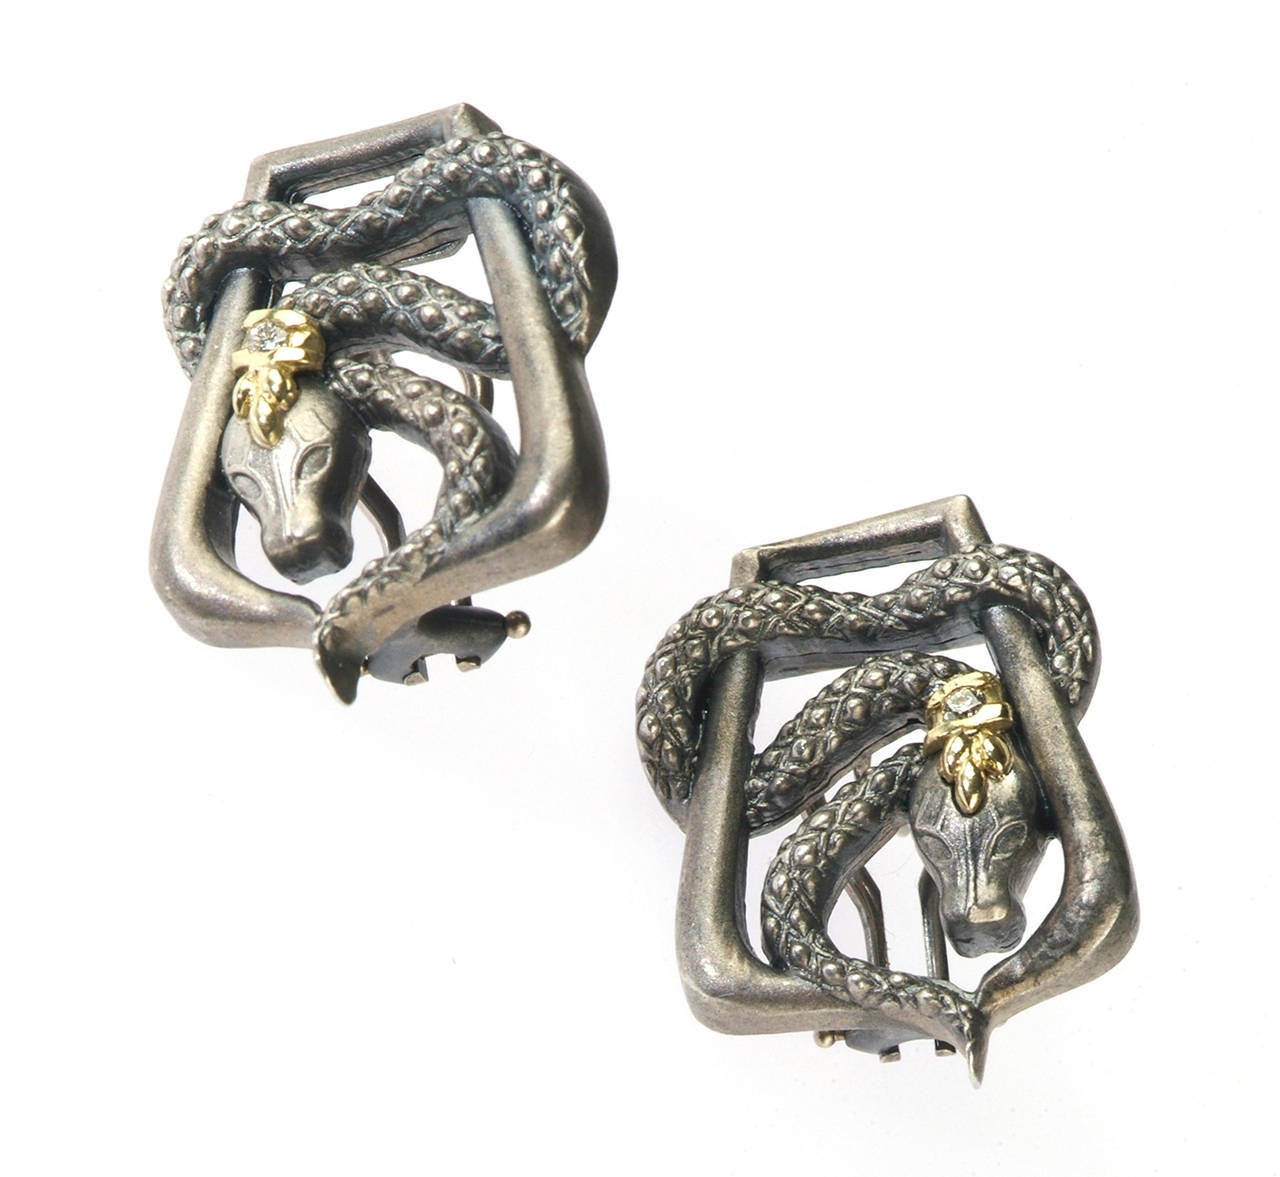 Aged Silver & 18k Gold Snake Earrings from our 